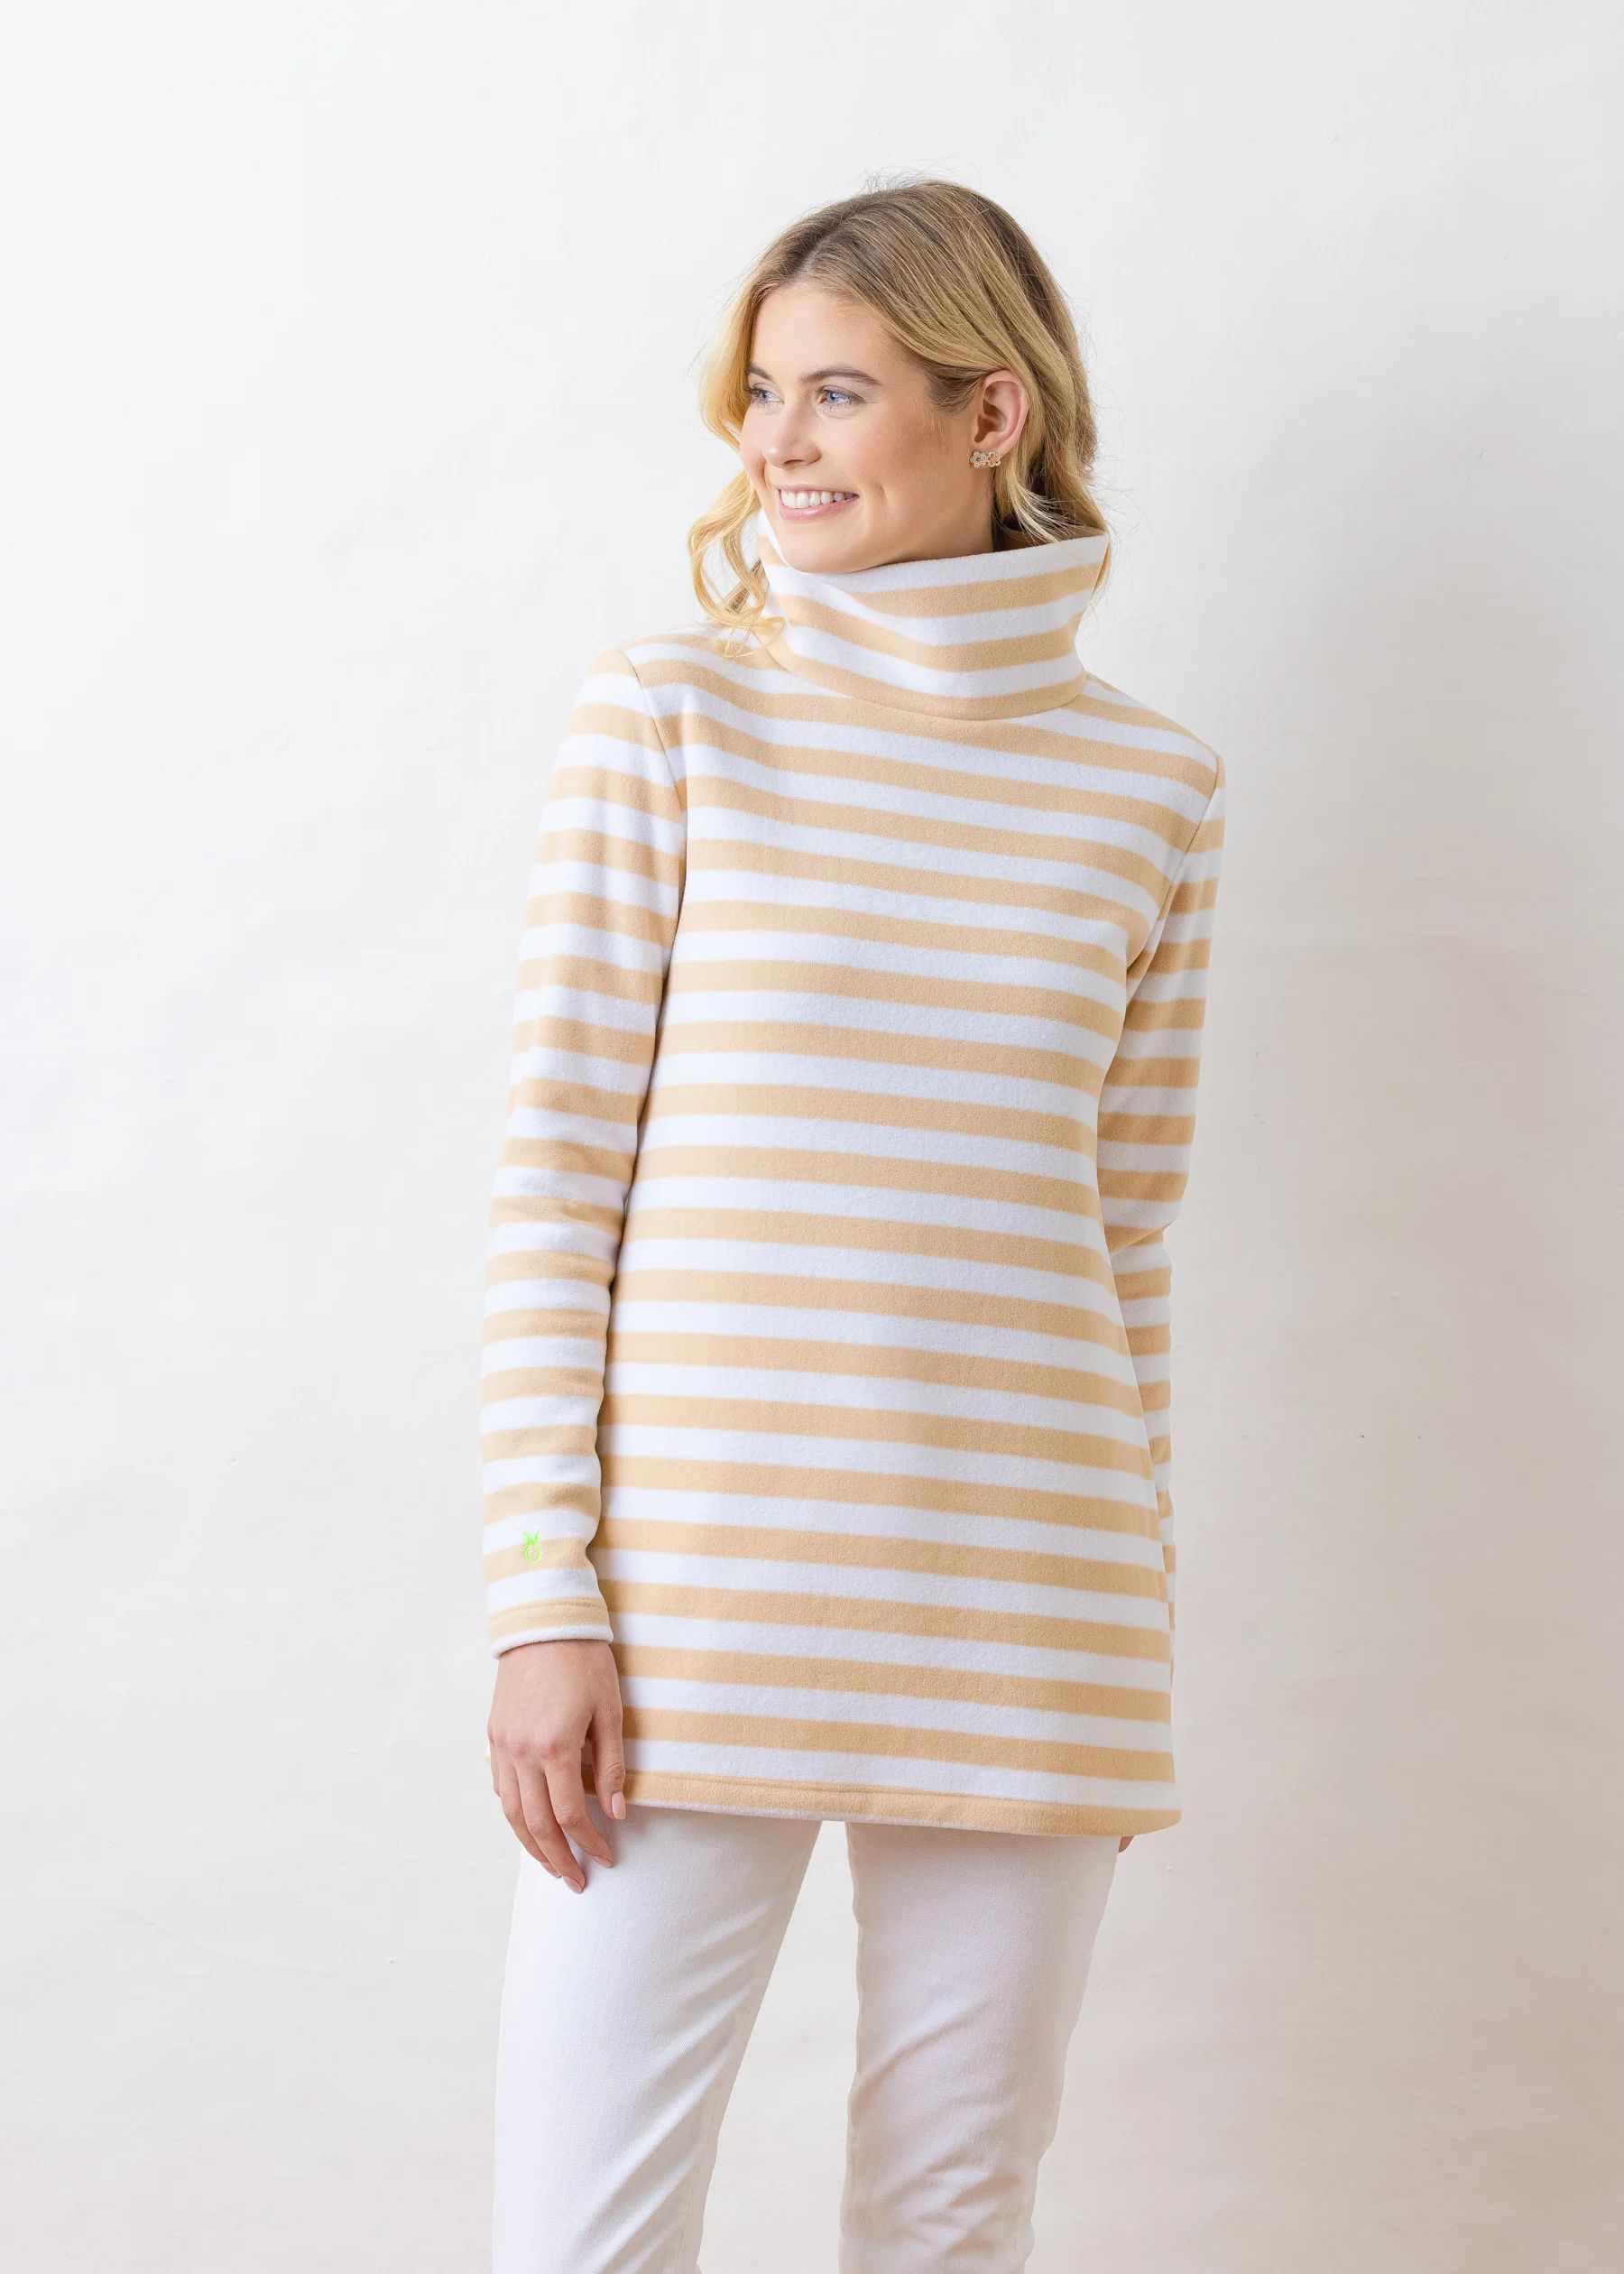 Cobble Hill Turtleneck in Striped Fleece (Natural Blush / White) | Dudley Stephens